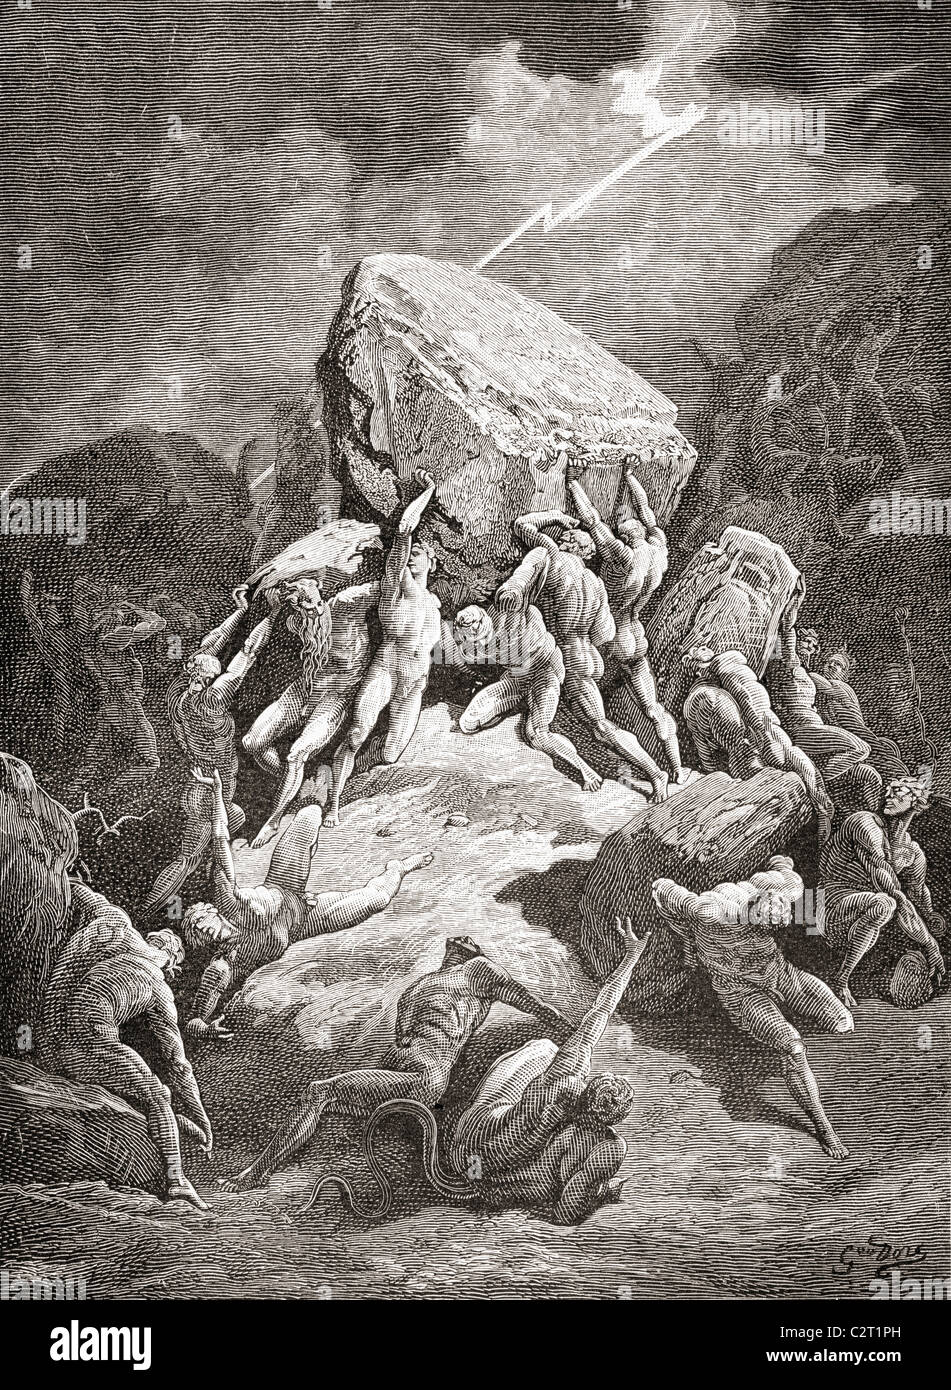 After an original sketch for the Bible by Gustave Dore. Stock Photo